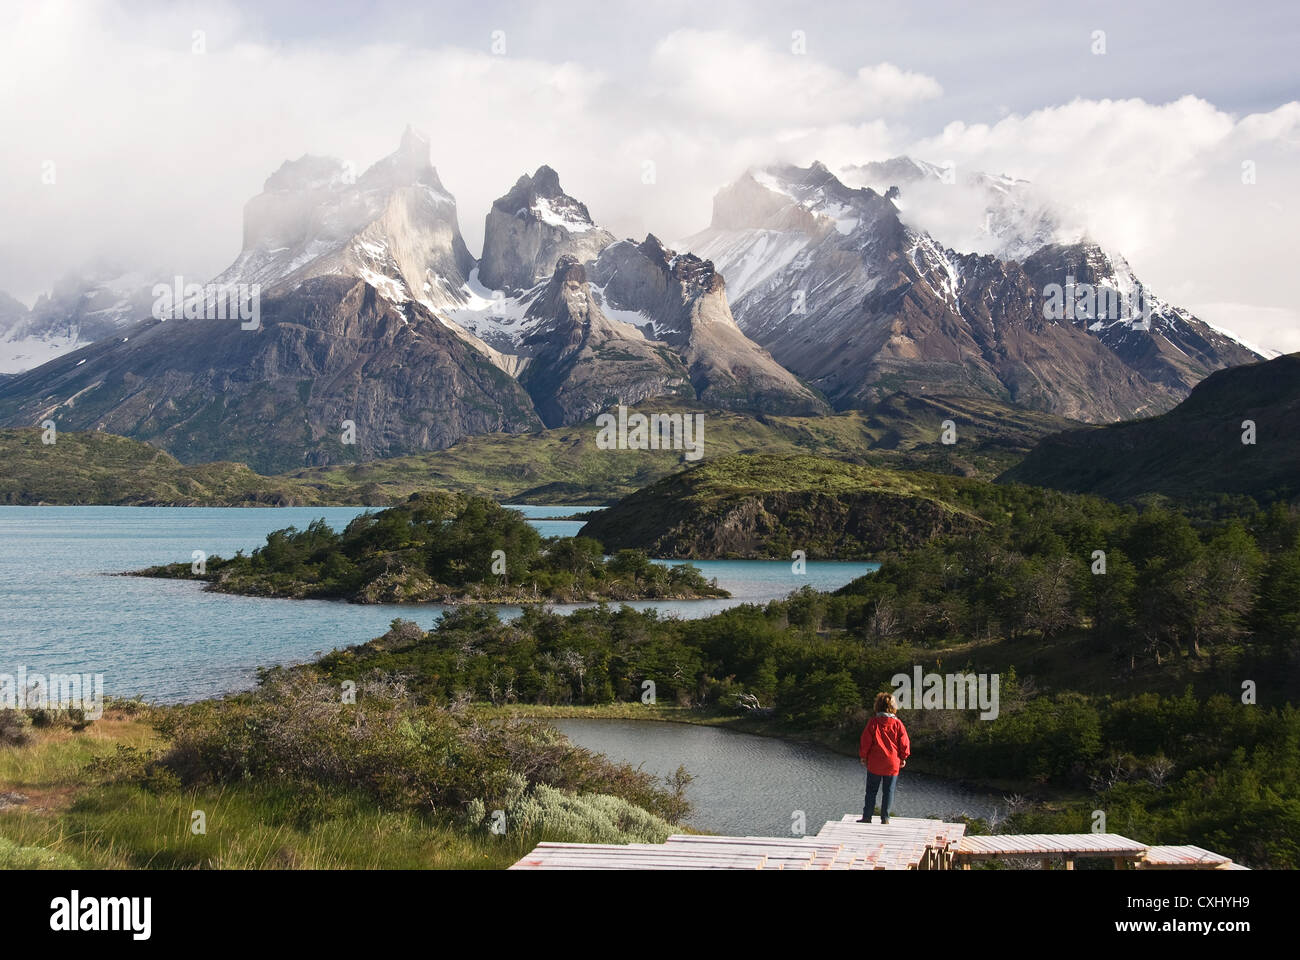 Elk198-4427 Chile, Patagonia, Torres del Paine NP, Cuernos massif with Lago Pehoe, Andes, model released Stock Photo